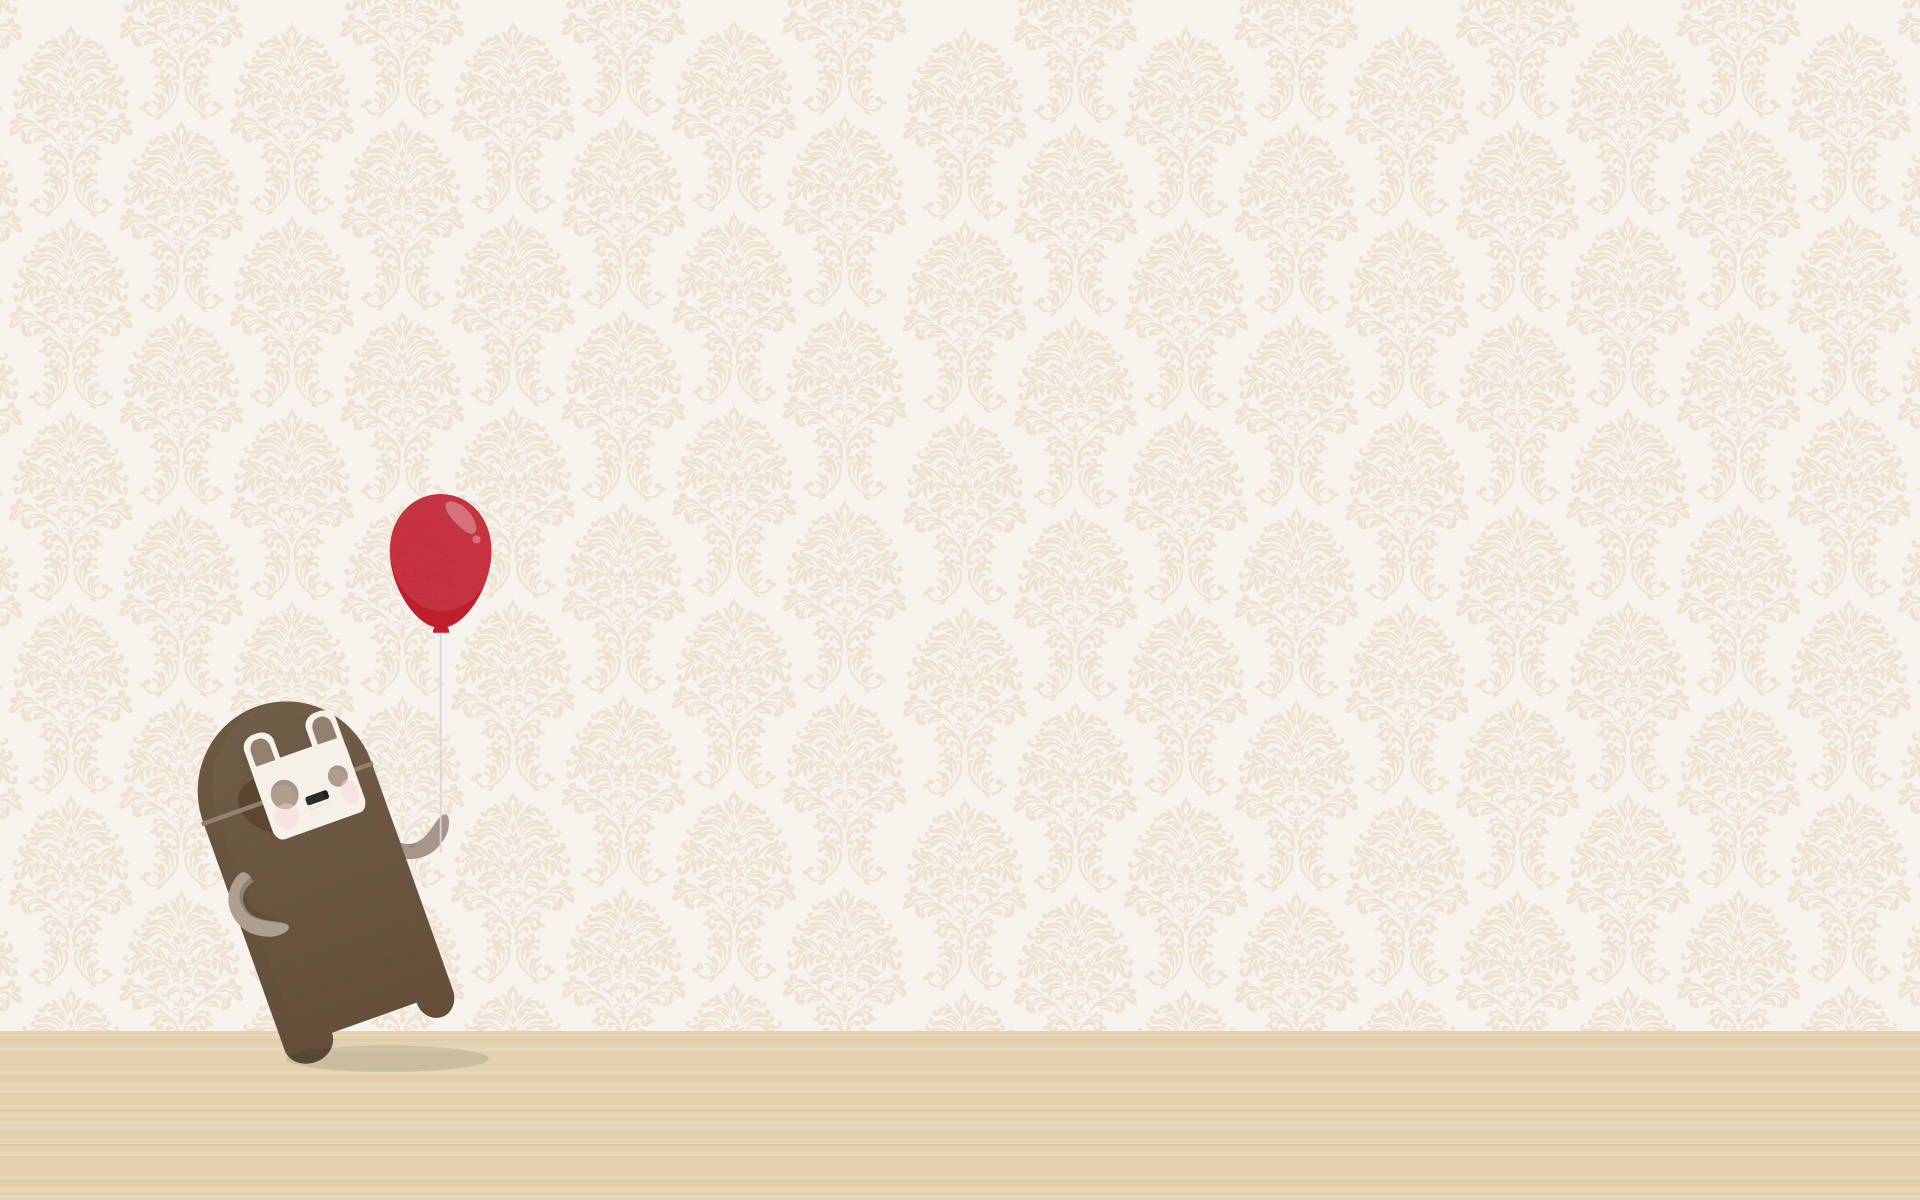 A Cartoon Character Is Holding A Red Balloon Wallpaper